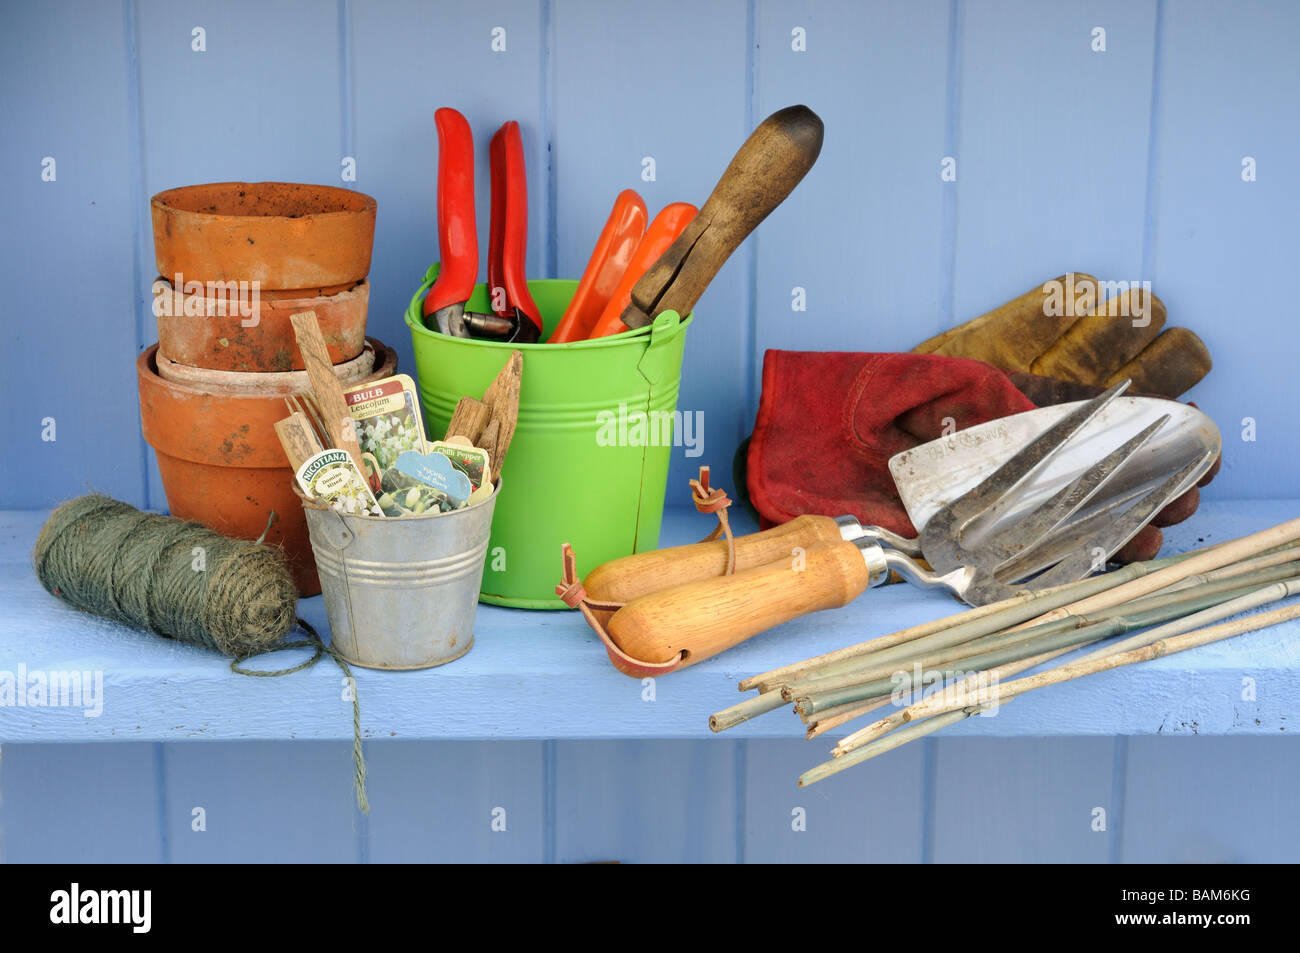 Springtime potting shed scene with shelf containing colourful garden buckets and gardening bits and pieces Stock Photo